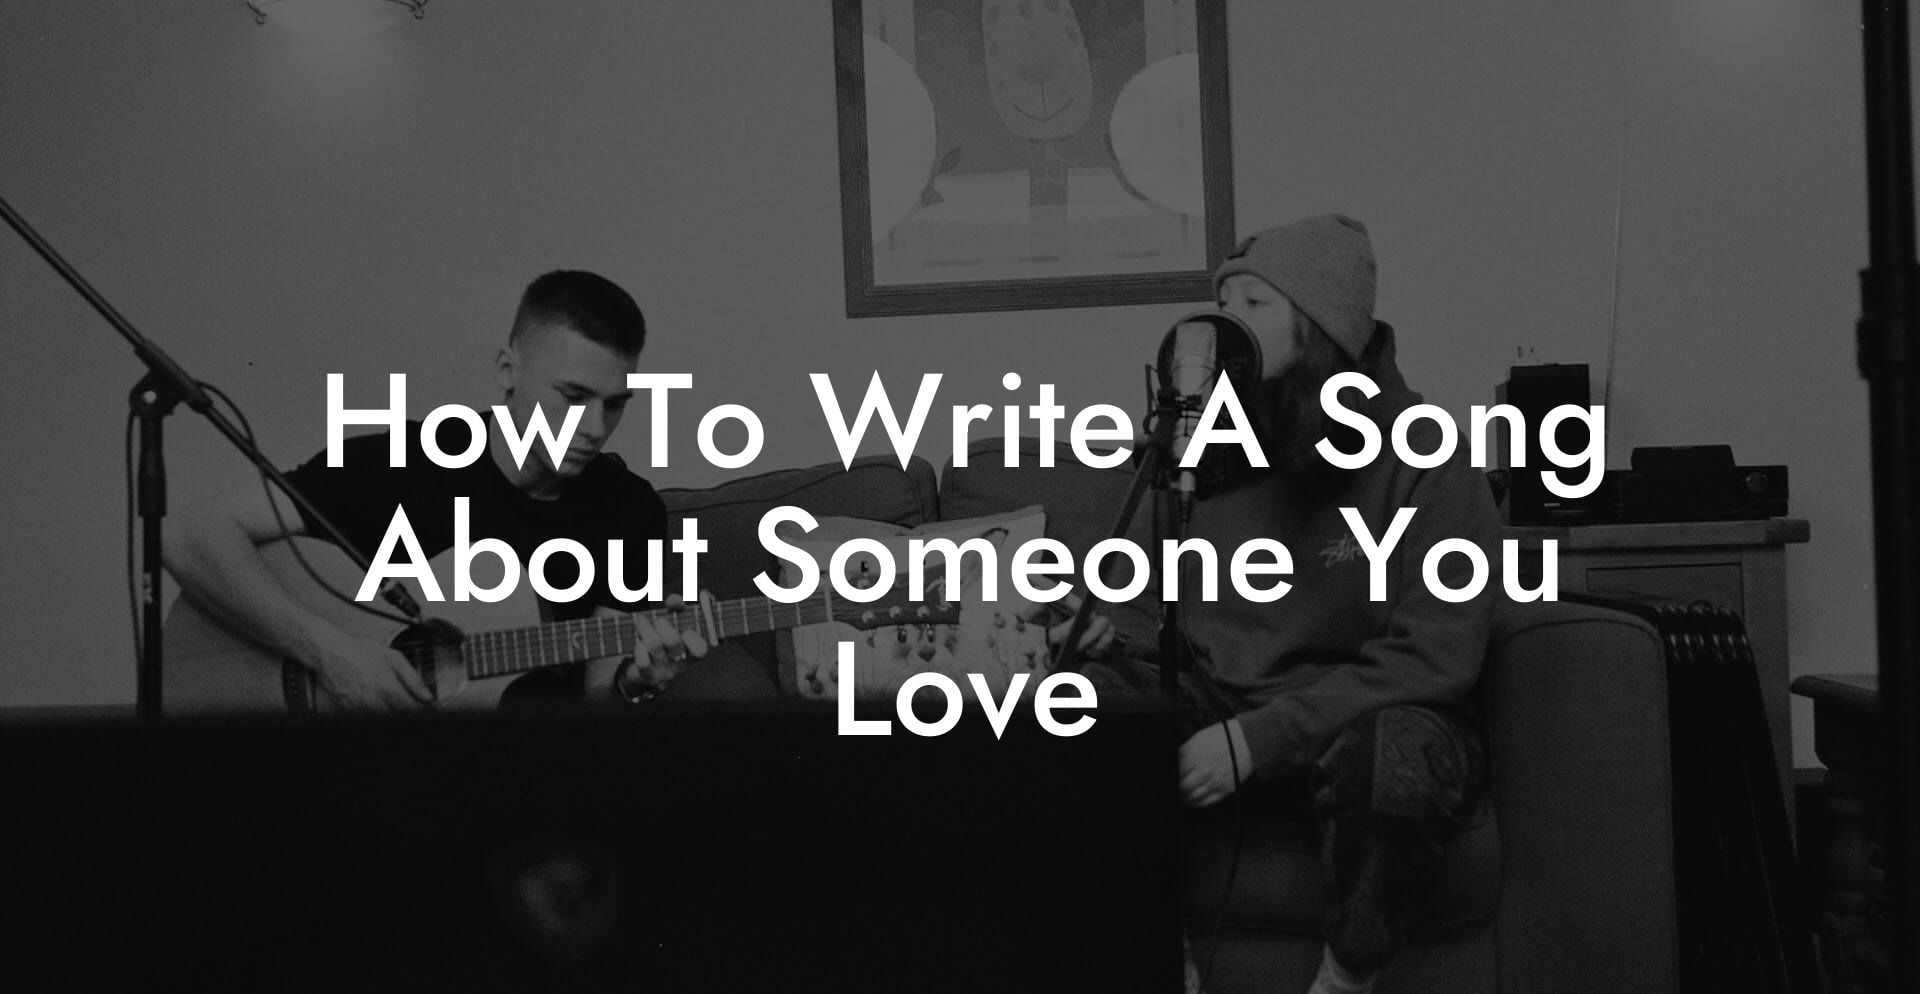 how to write a song about someone you love lyric assistant